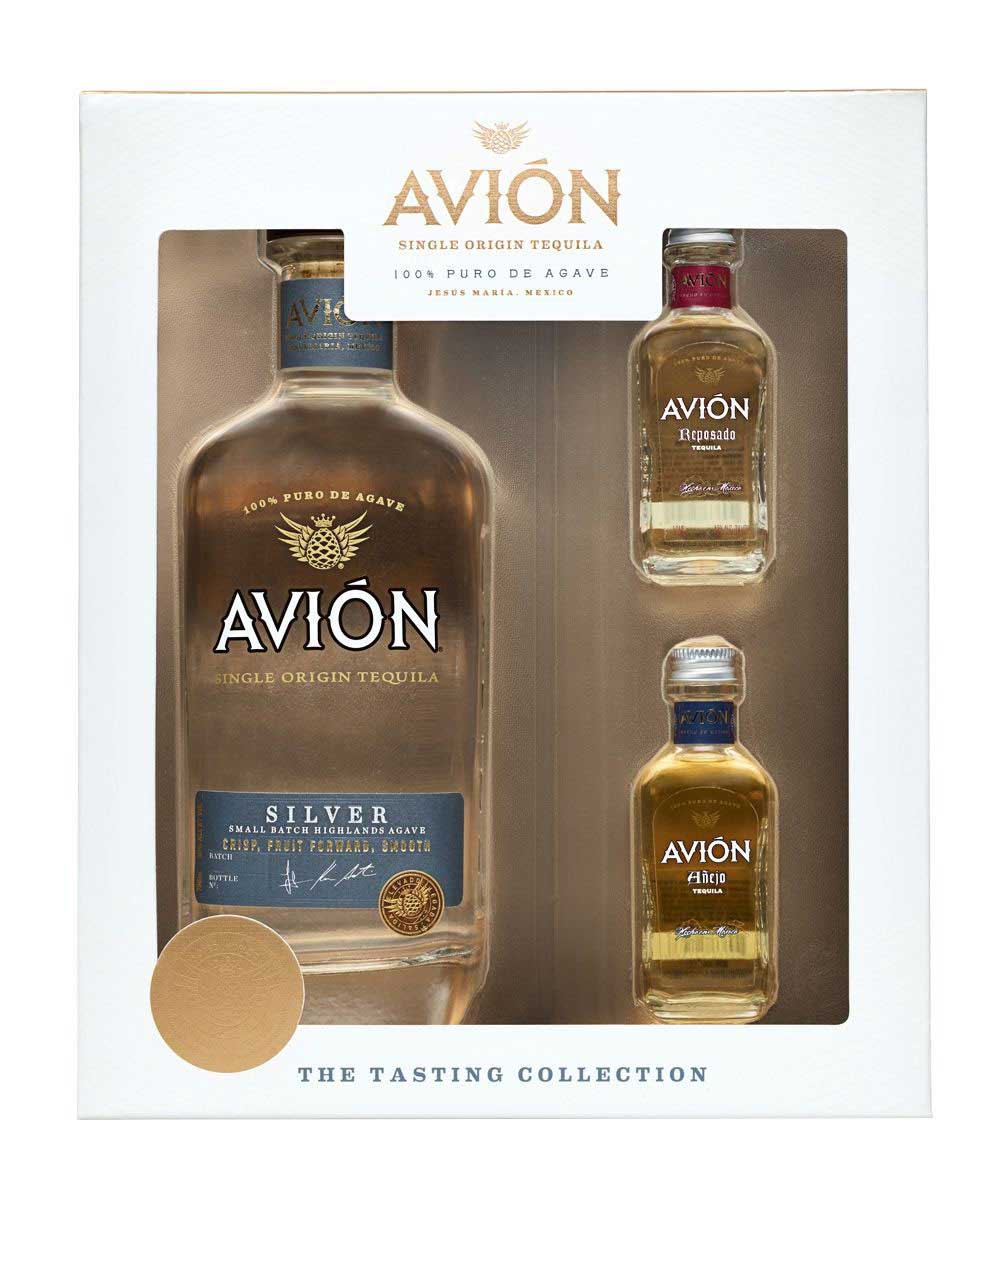 The Tasting Collection by Avion Tequila